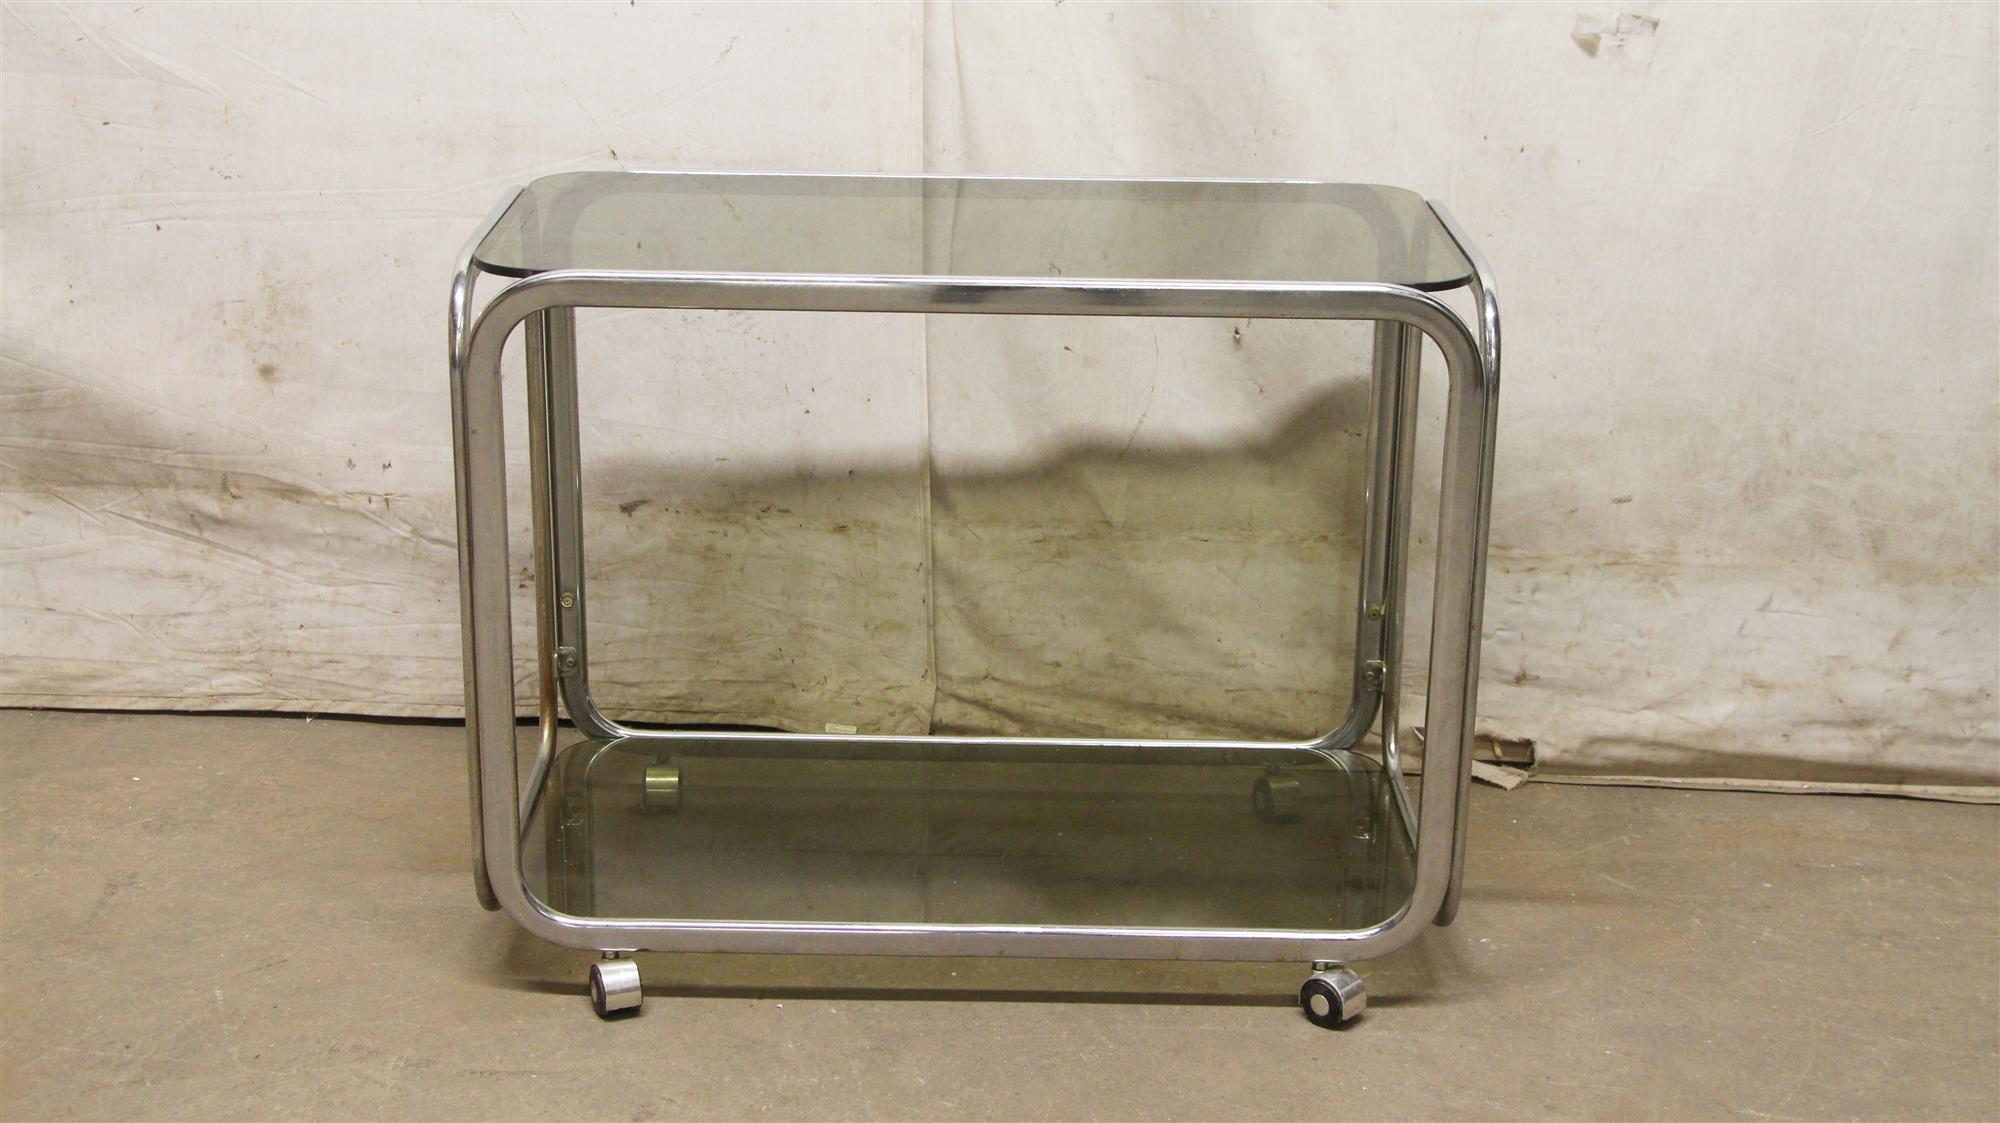 1980s bar cart with a chrome frame and dark glass shelves from France done in a Mid-Century Modern style. This can be seen at our 333 West 52nd St location in the Theater District West of Manhattan.